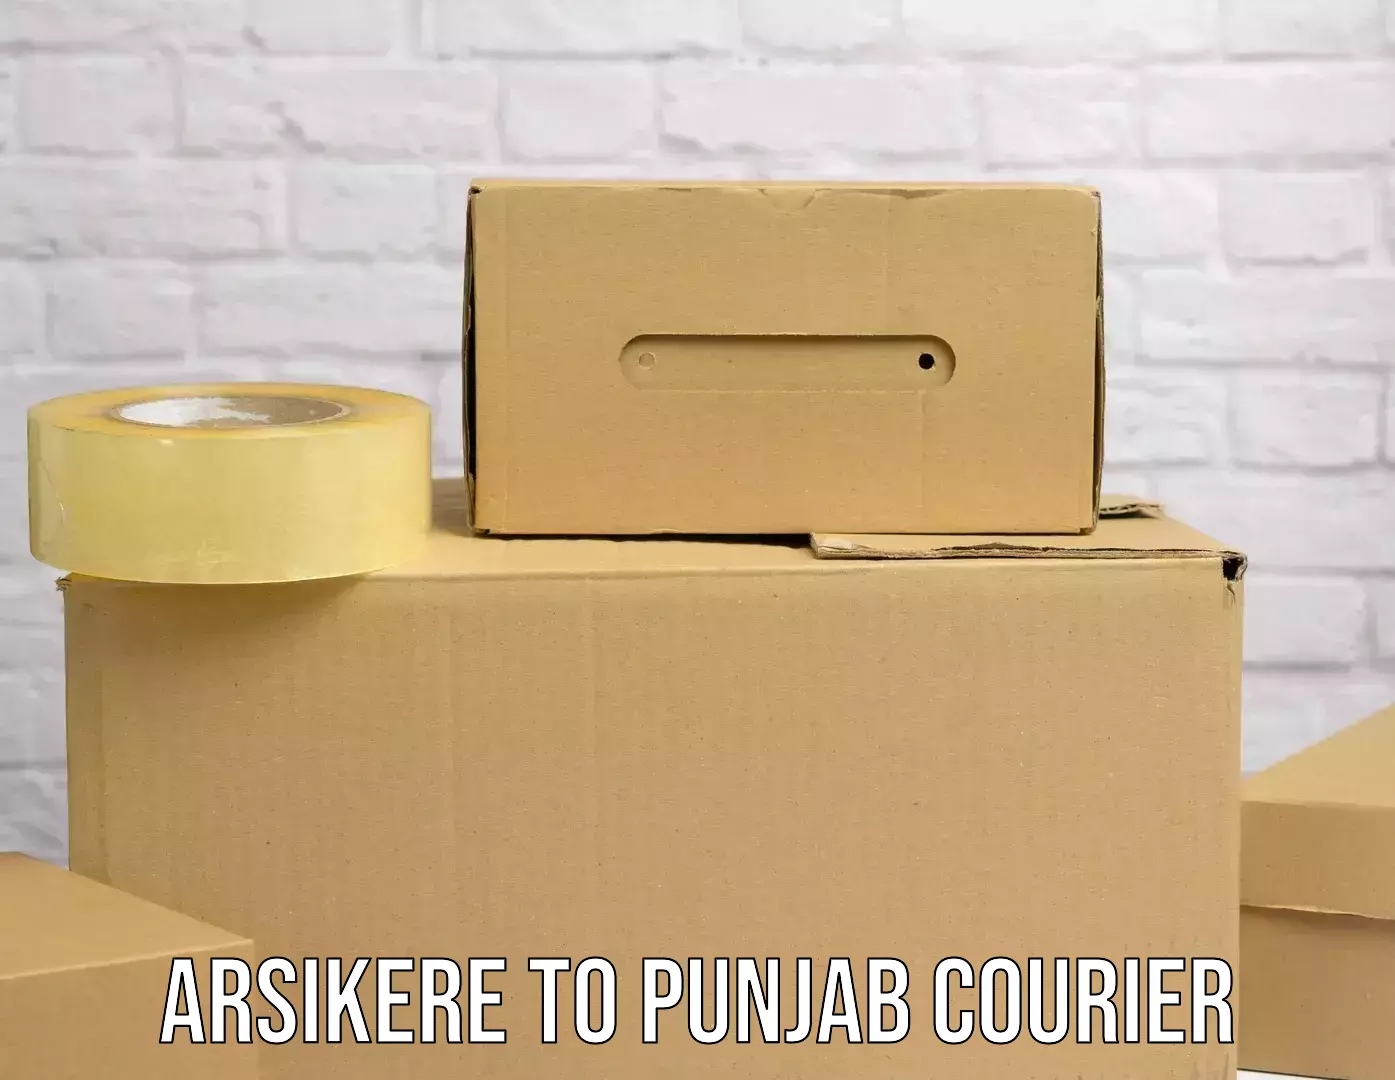 Express package transport Arsikere to Mehta Chowk